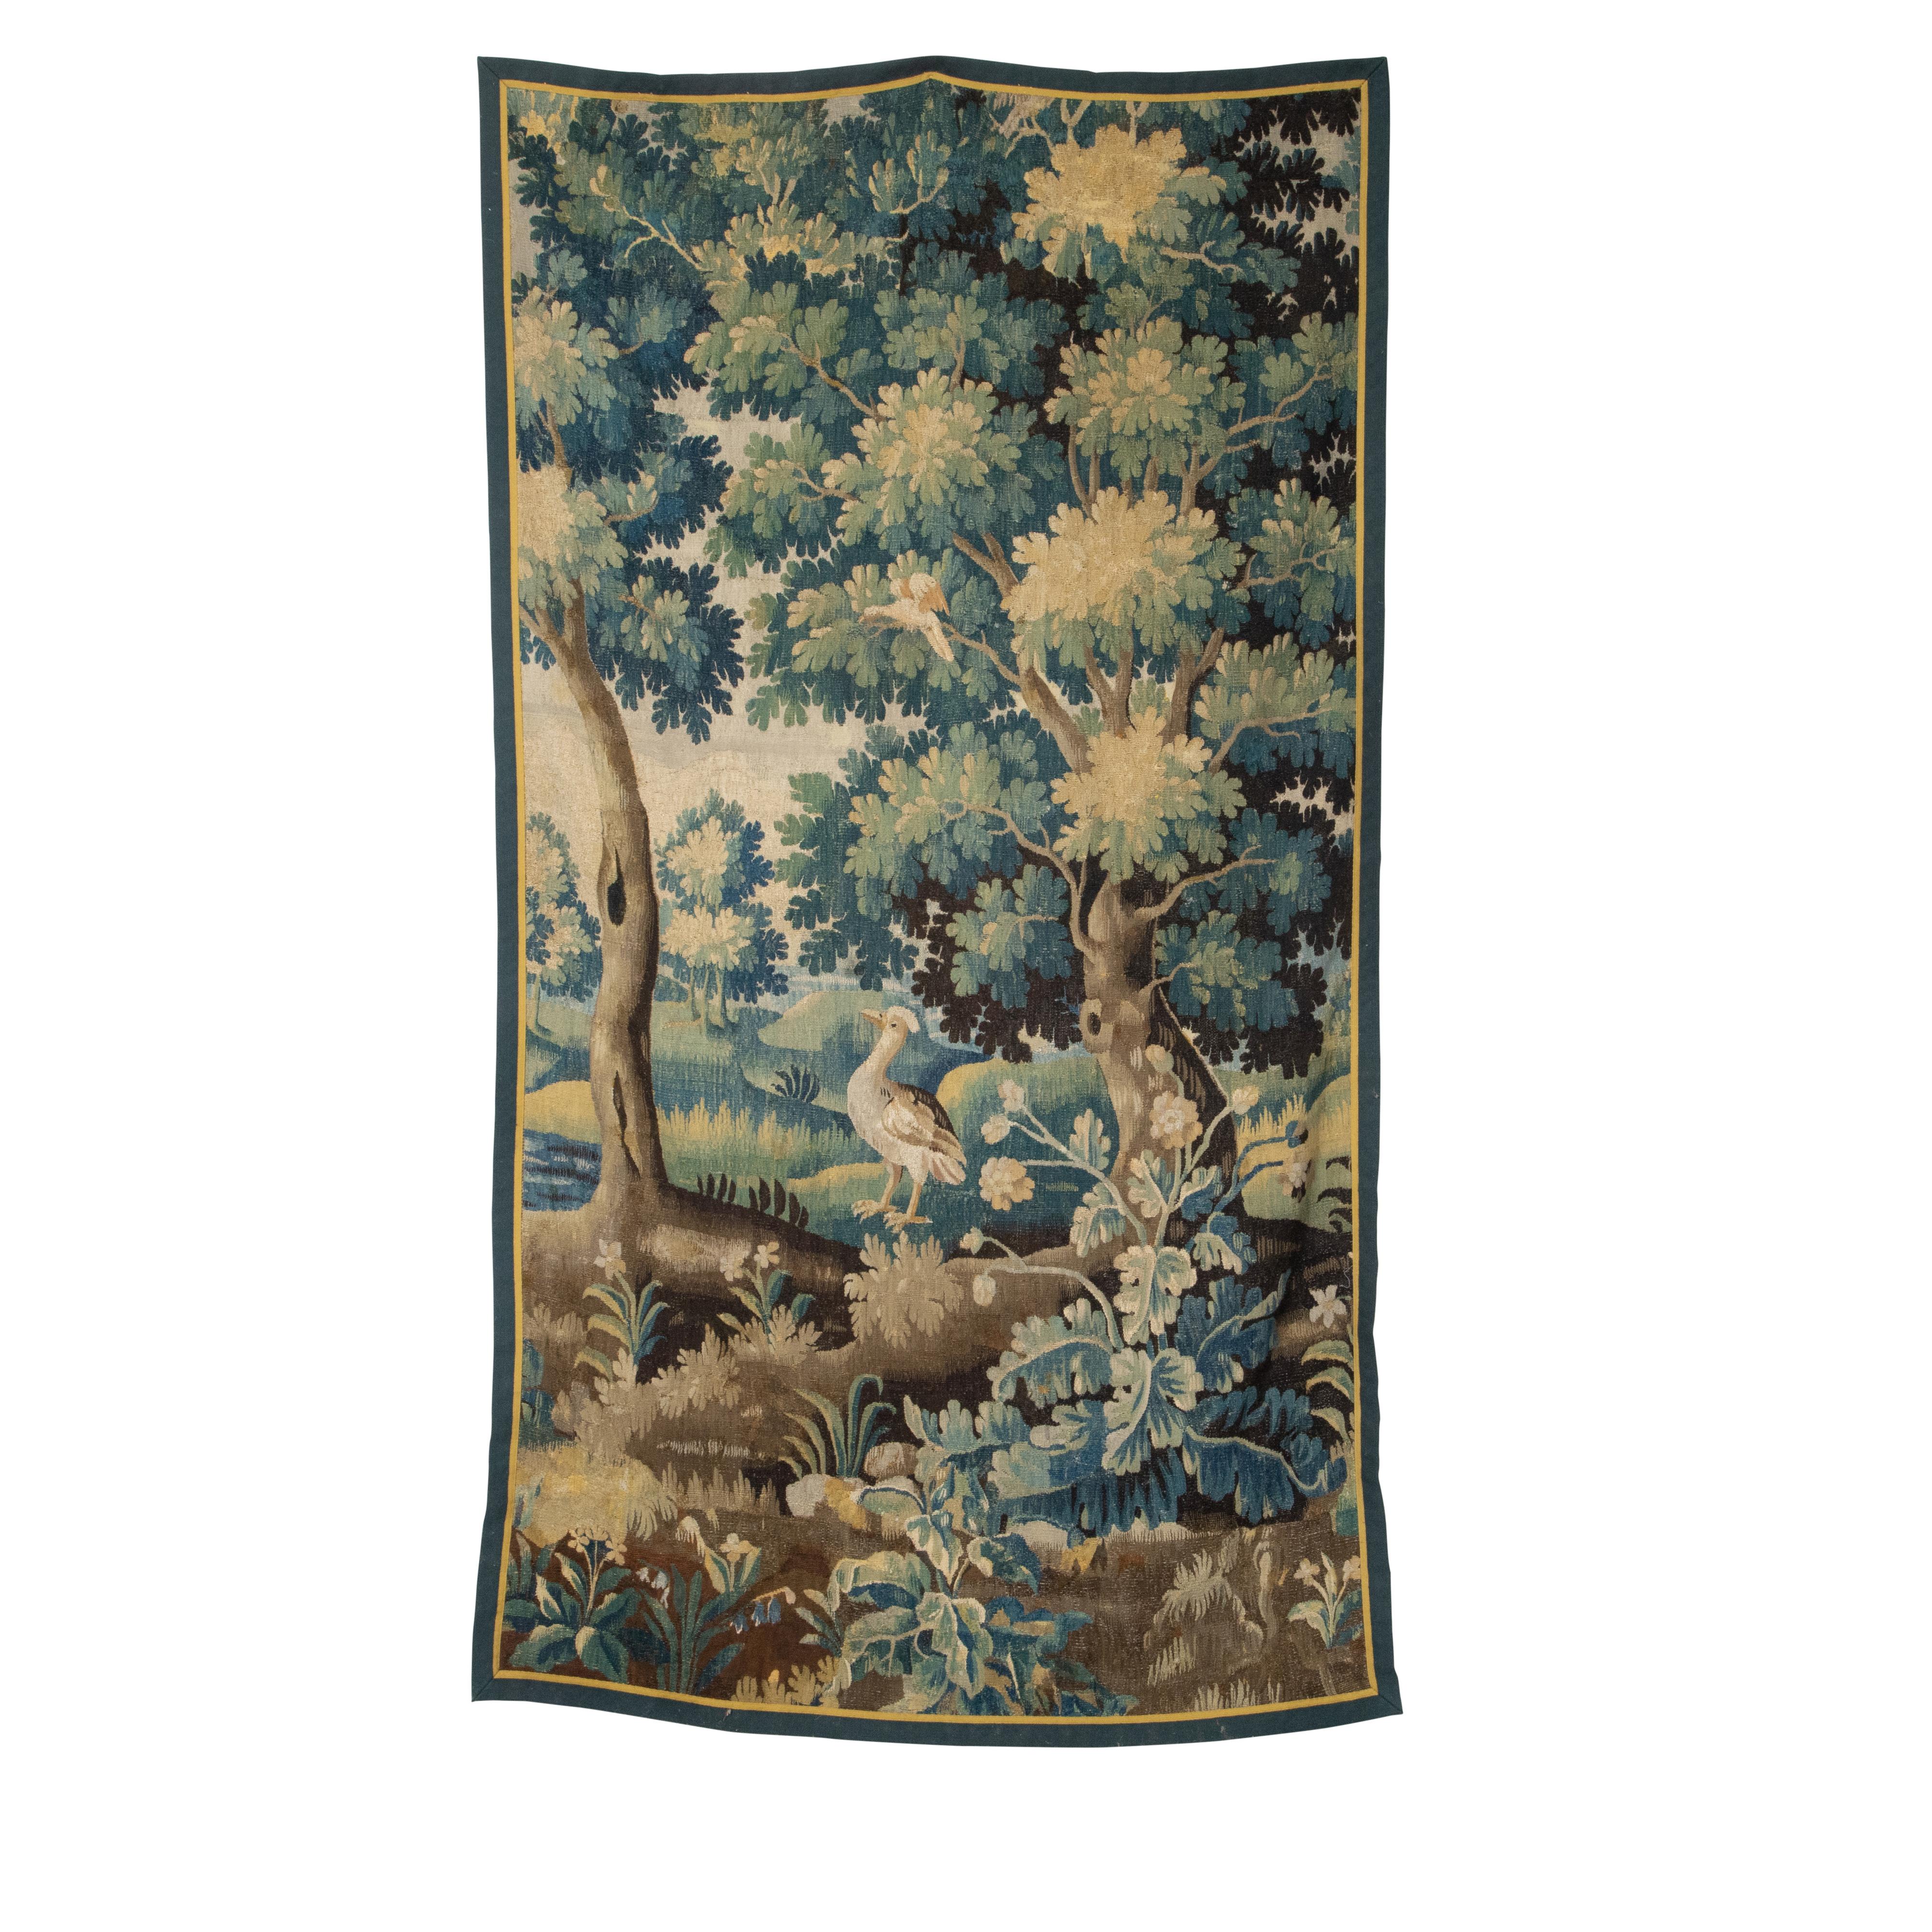 Woven French Mid-18th Century Aubusson Vertical Tapestry Depicting a Bird in the Woods